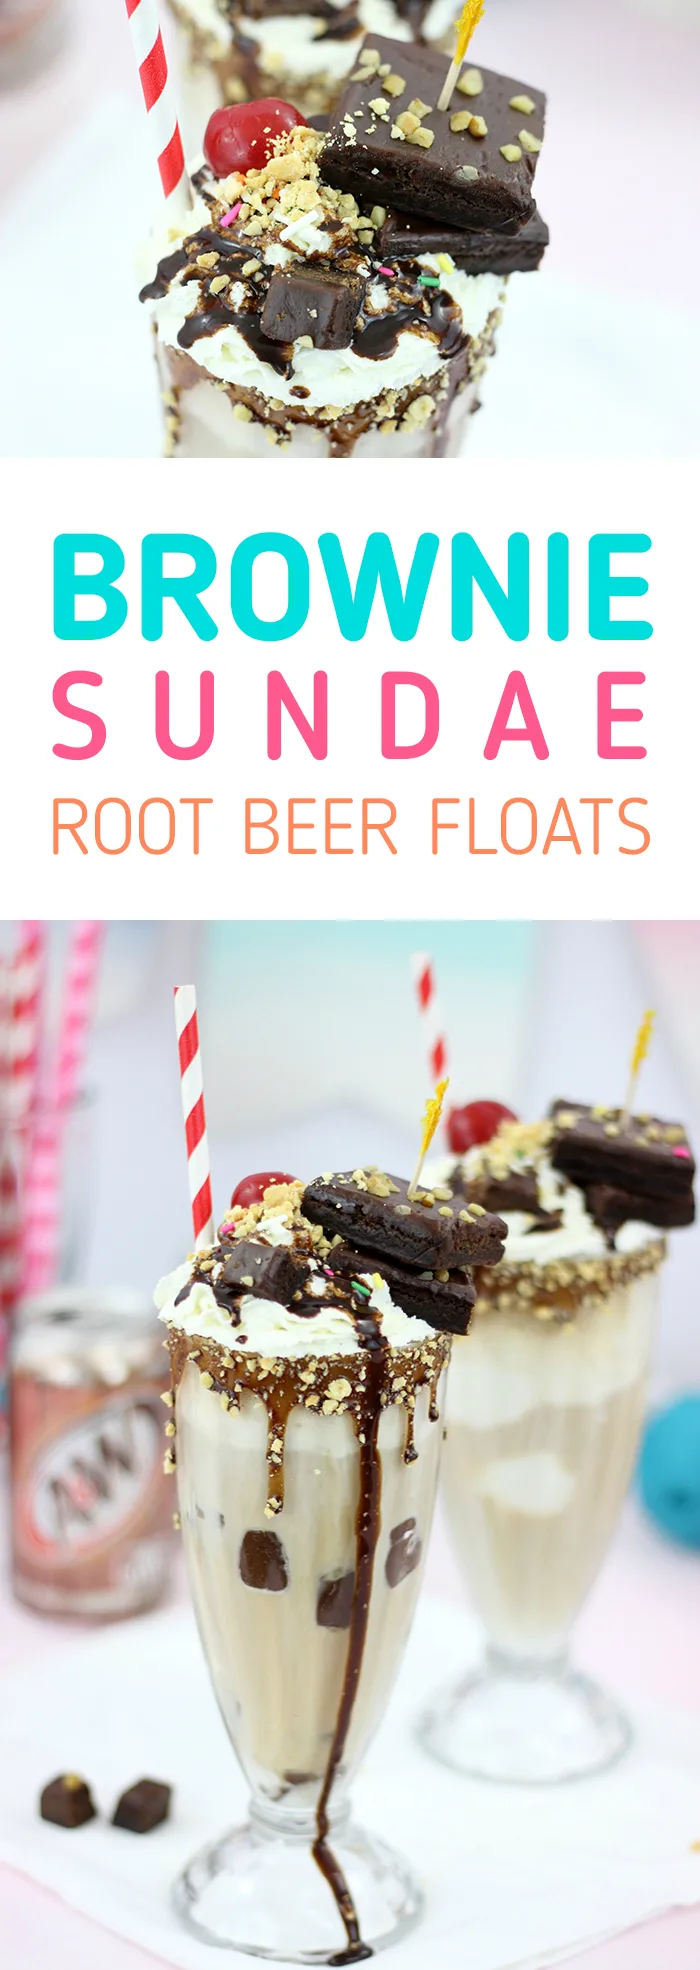 Brownie Sundae Root Beer Float. Basically two of the best desserts merged into one amazing creation. Yes Please